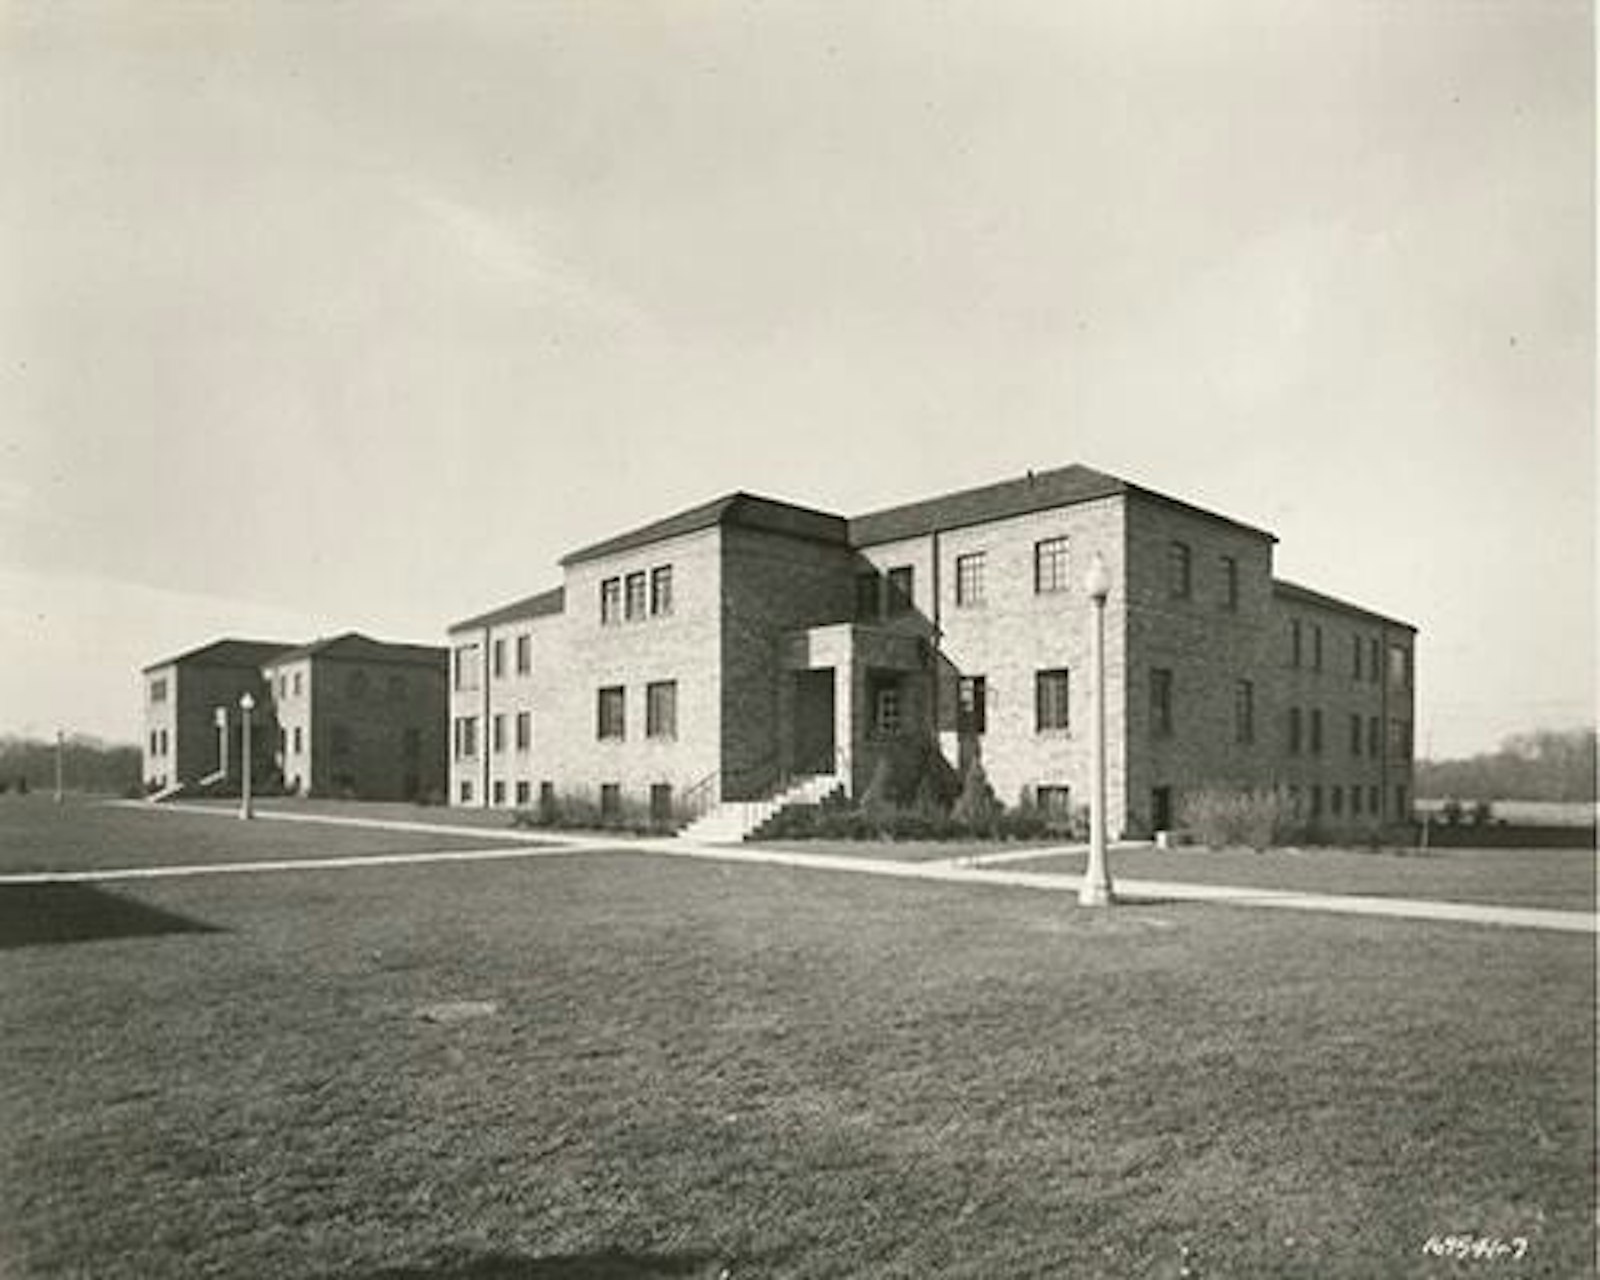 One of the original campus buildings, opened in 1942.